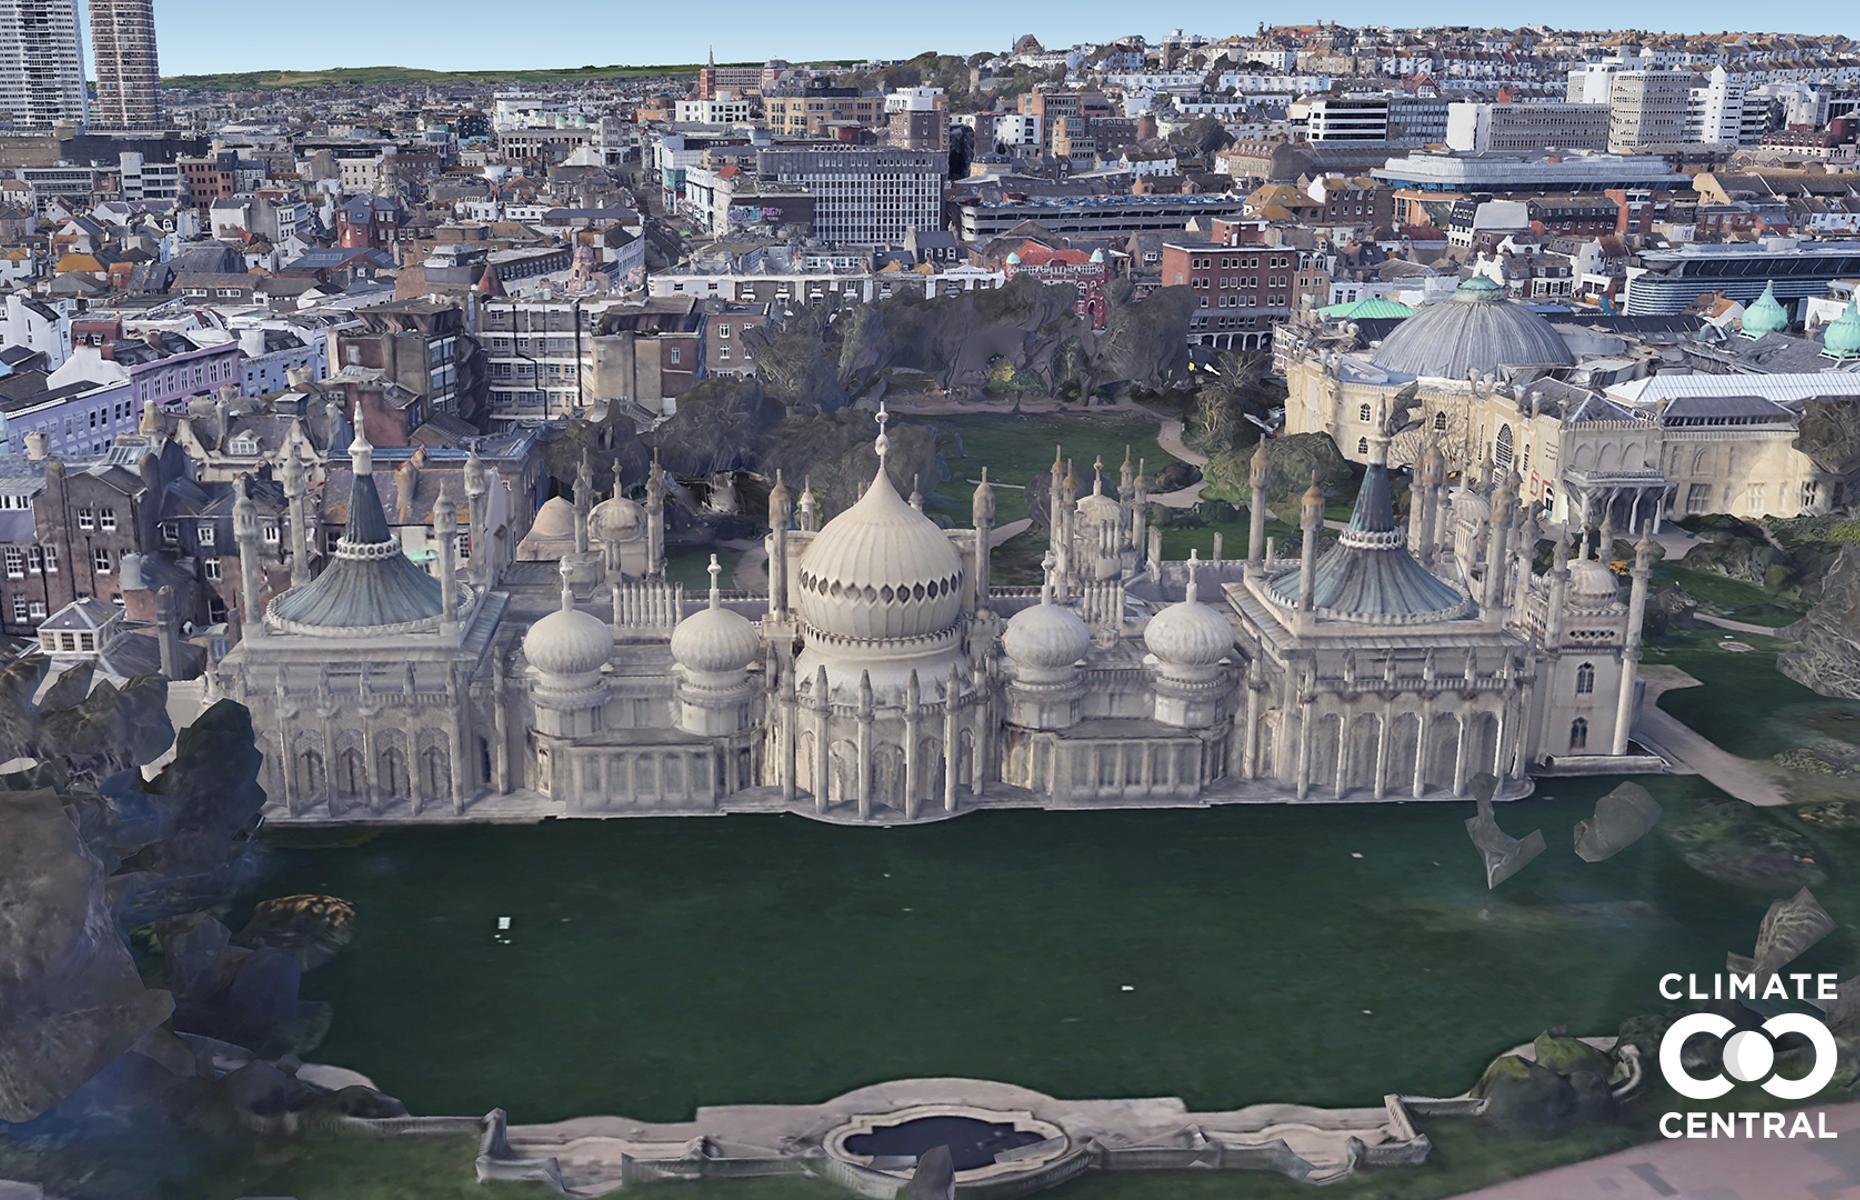 The 19th-century Royal Pavilion that graces the seaside city of Brighton is one of Britain’s finest examples of Victorian architecture. But its luxurious grounds, along with lower levels of the building, are set to be engulfed in seawater if drastic action to curb emissions is not taken.